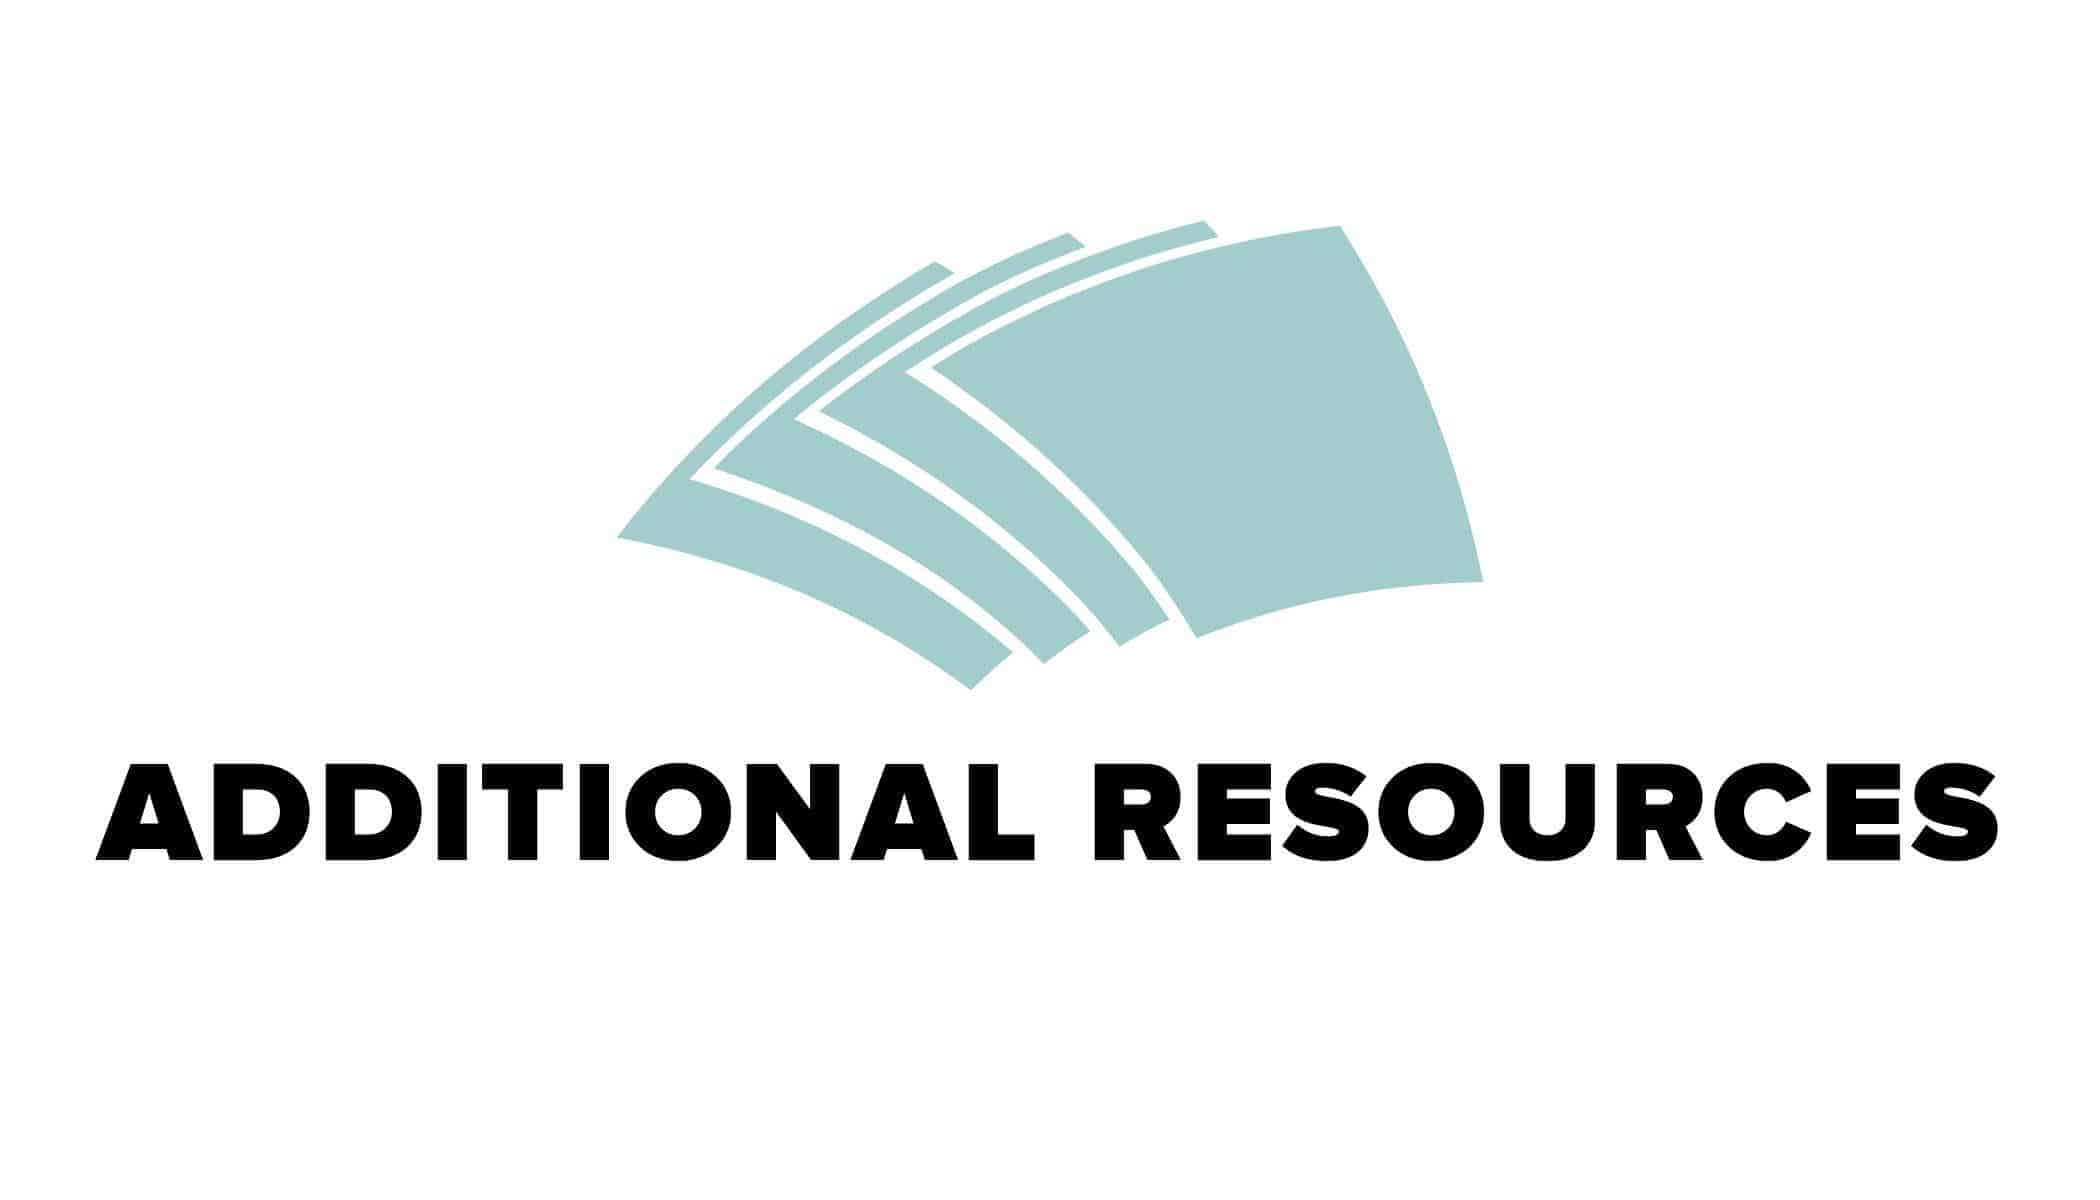 Additional Resources logo